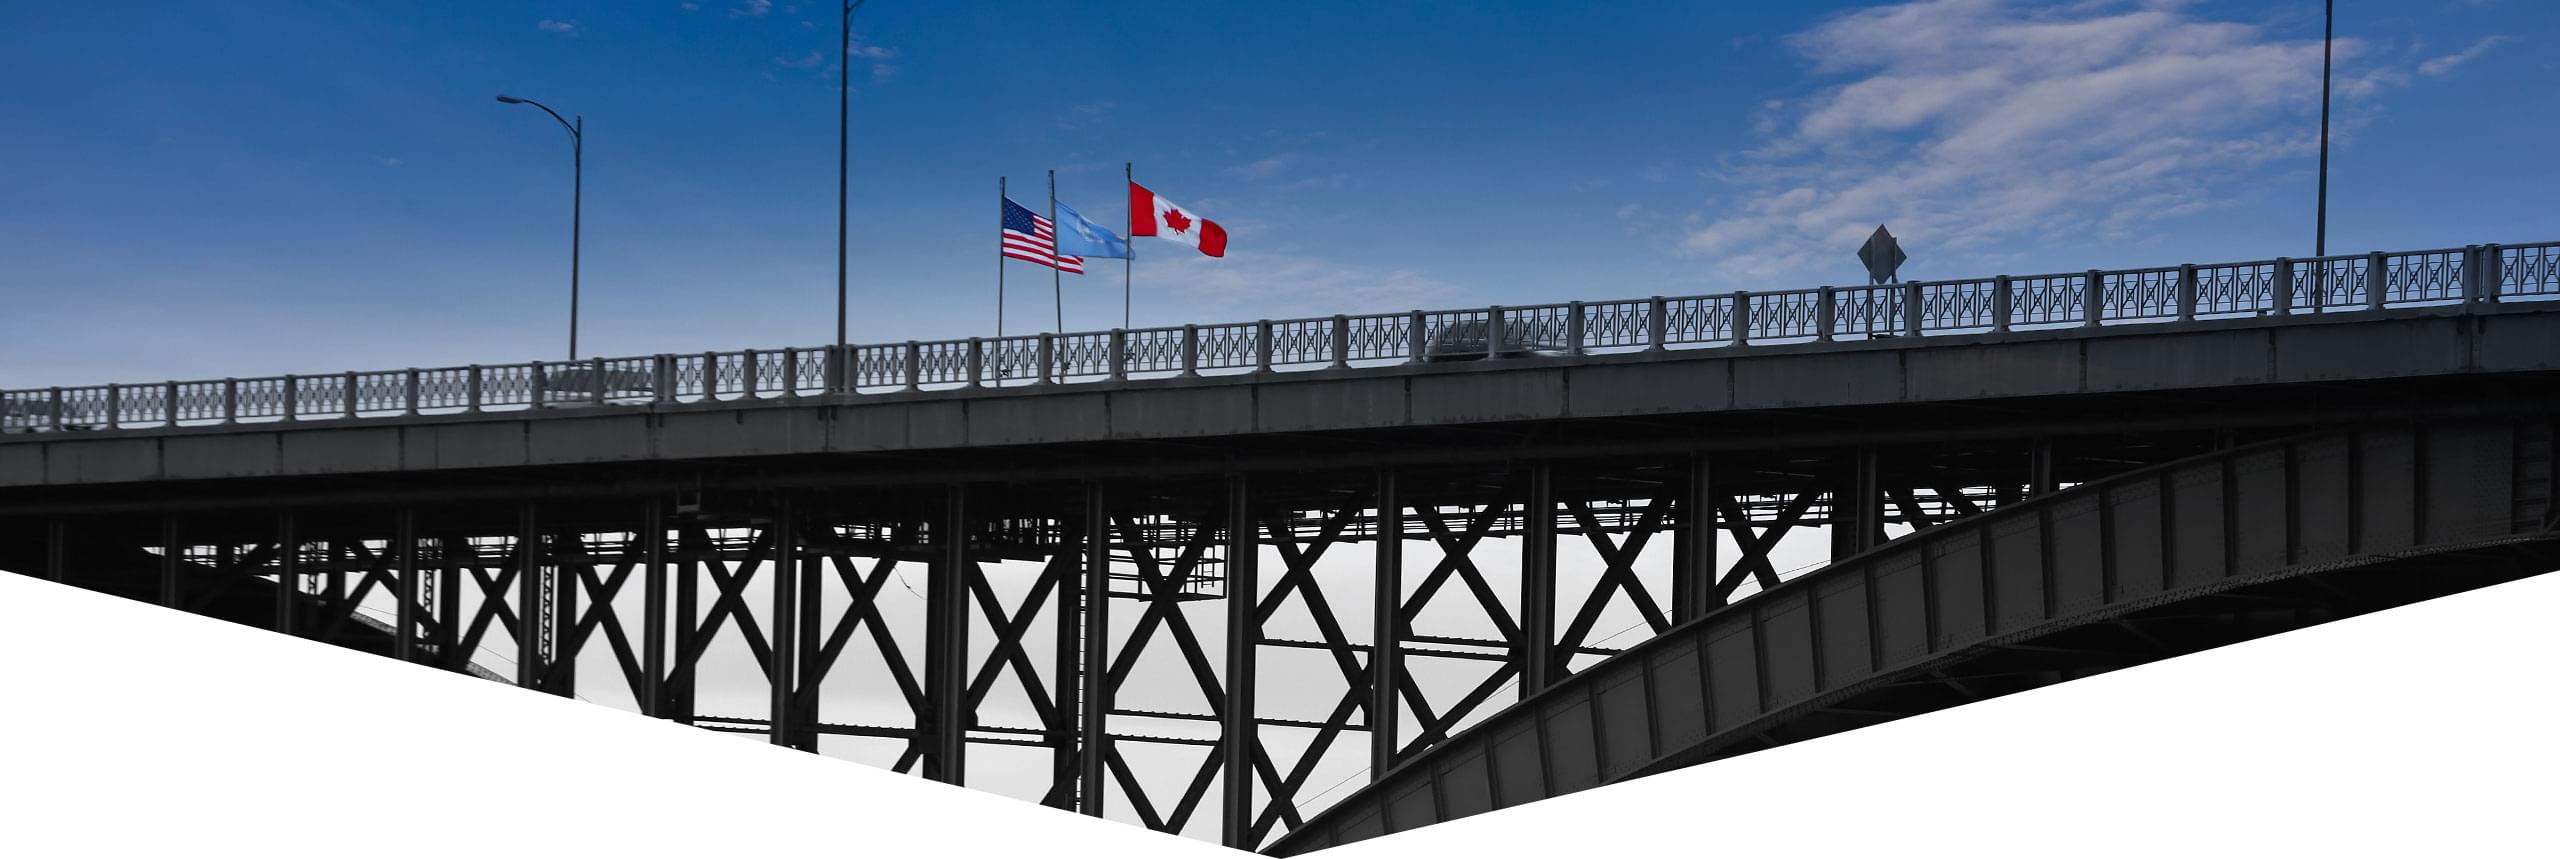 A border bridge crossing, with Canadian and American flags flying.